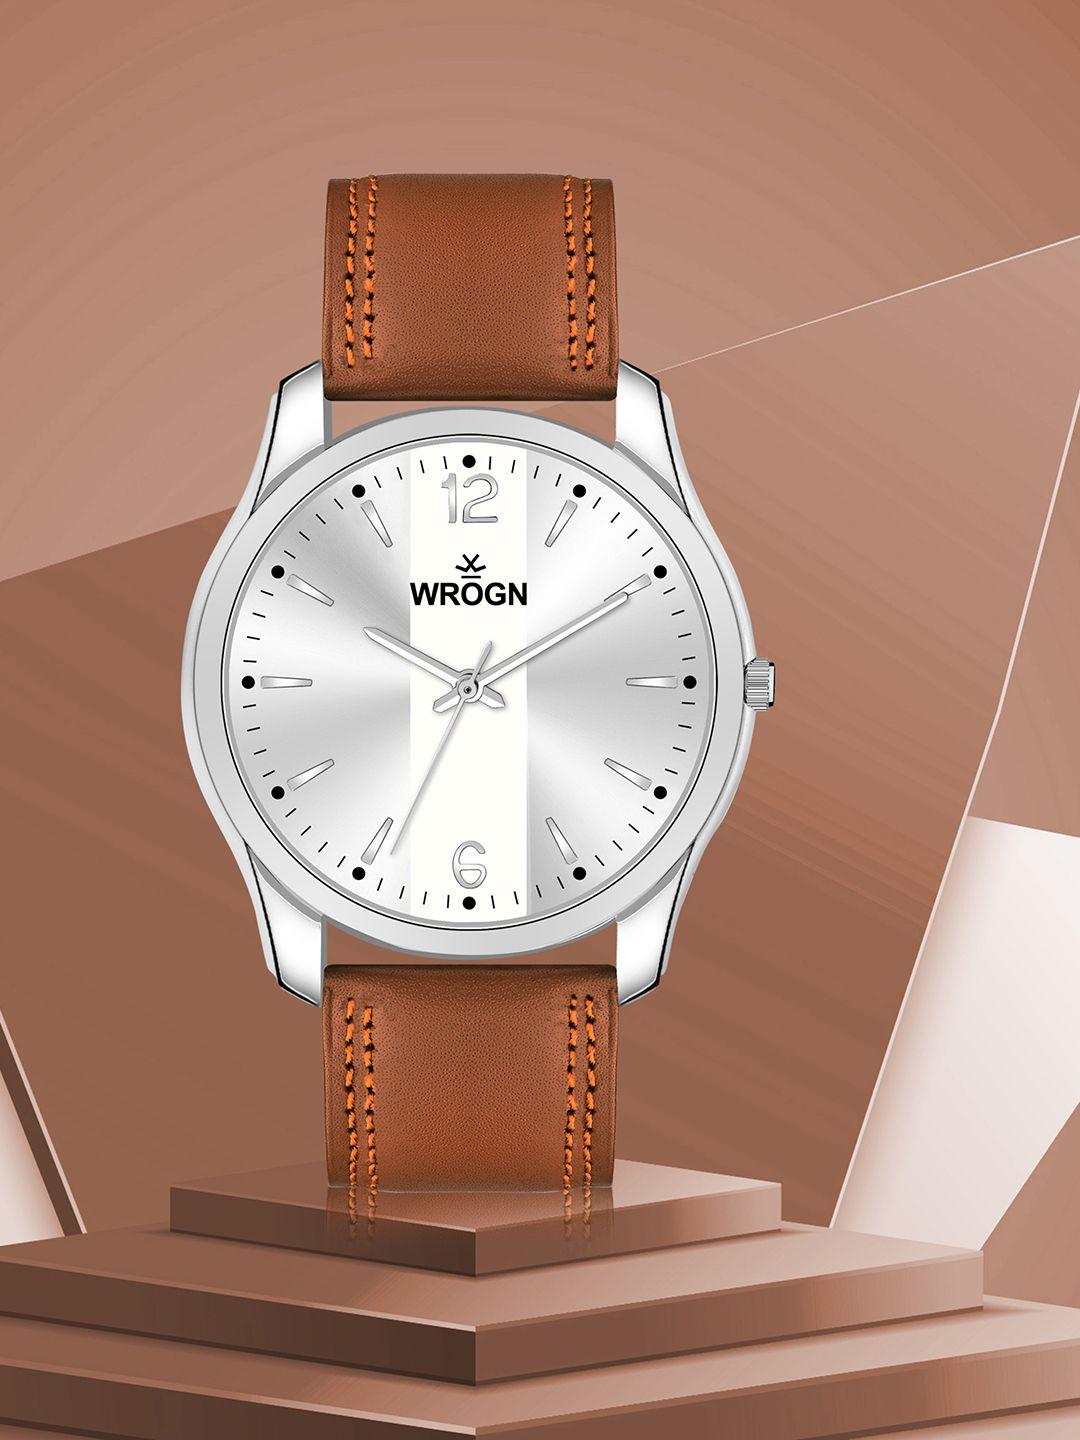 wrogn men textured dial & toned leather straps analogue watch wr-6602-silver